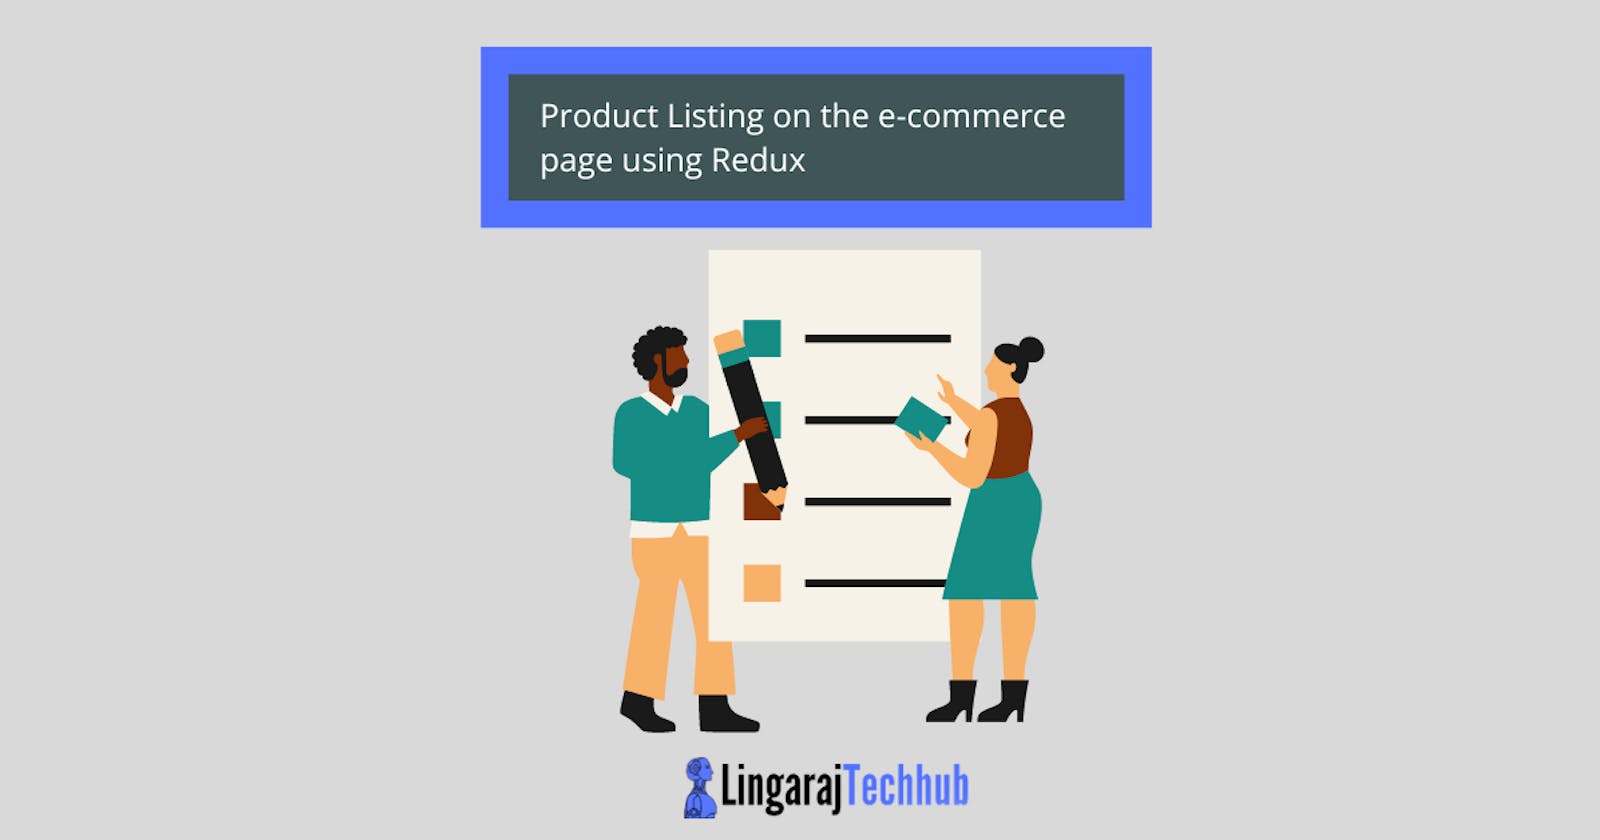 Product Listing on the e-commerce page using Redux